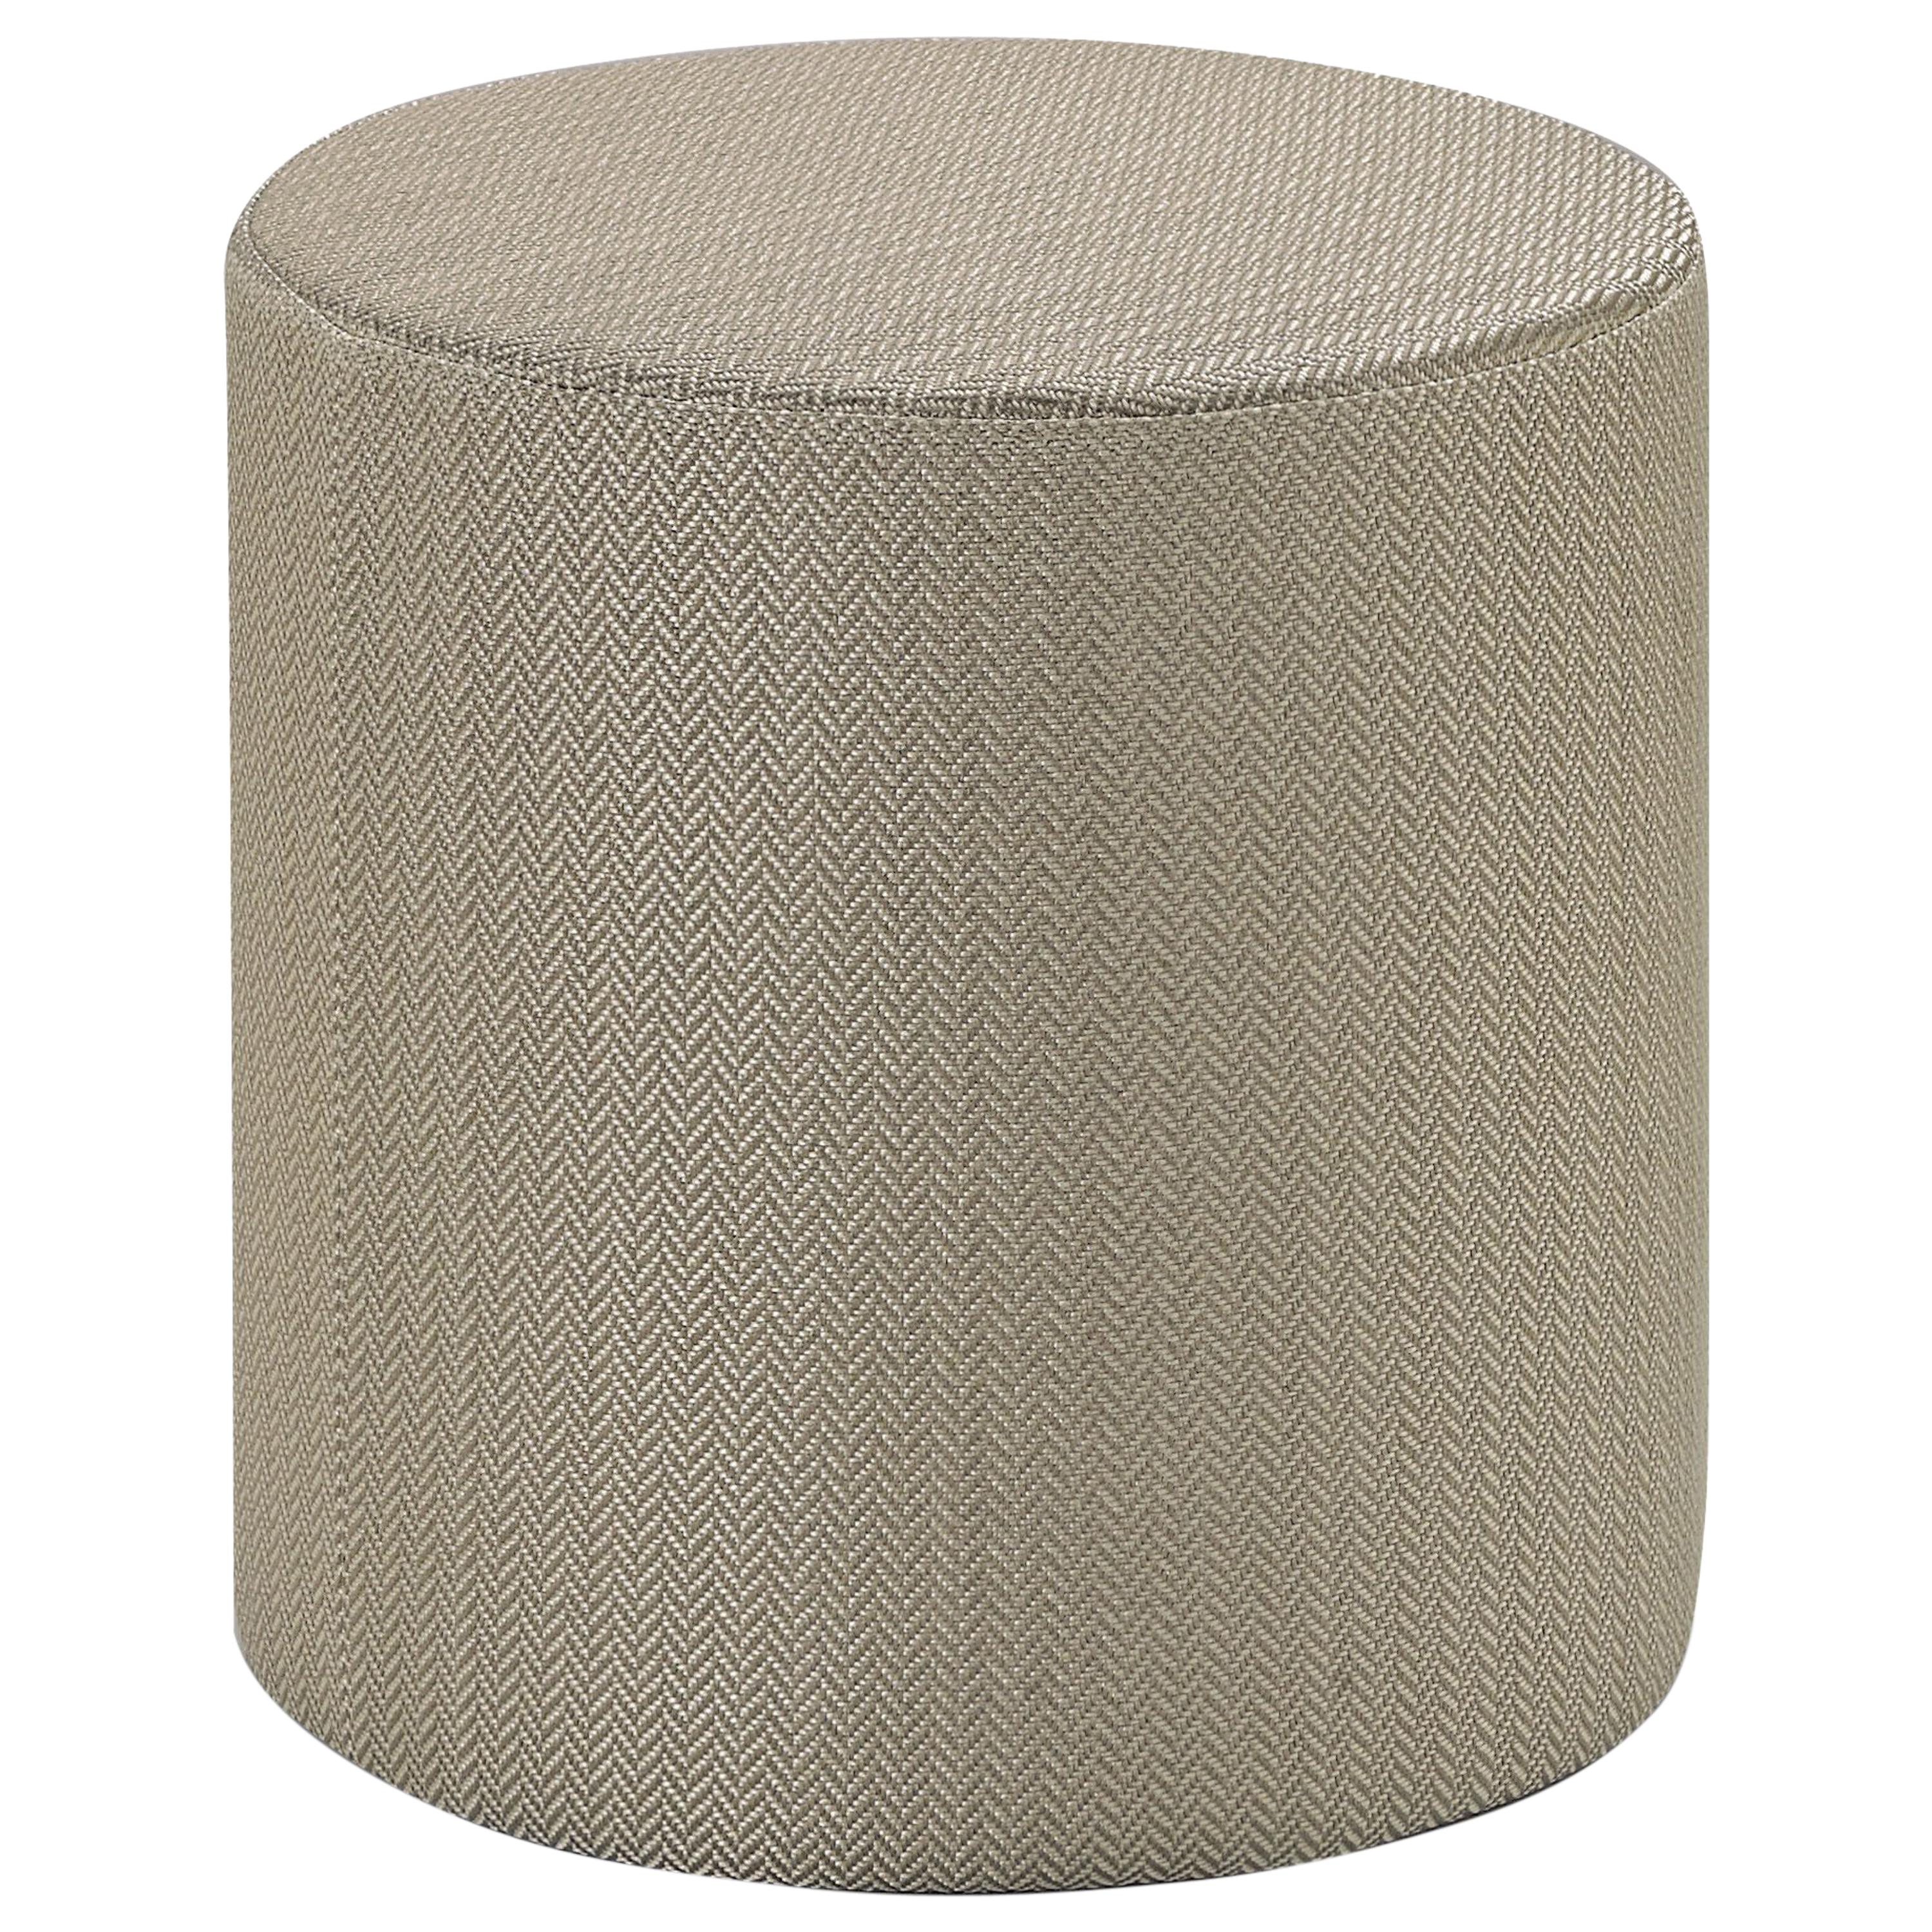 Missoni Home Ribe Tall Cylinder Pouf in Solid Tan For Sale